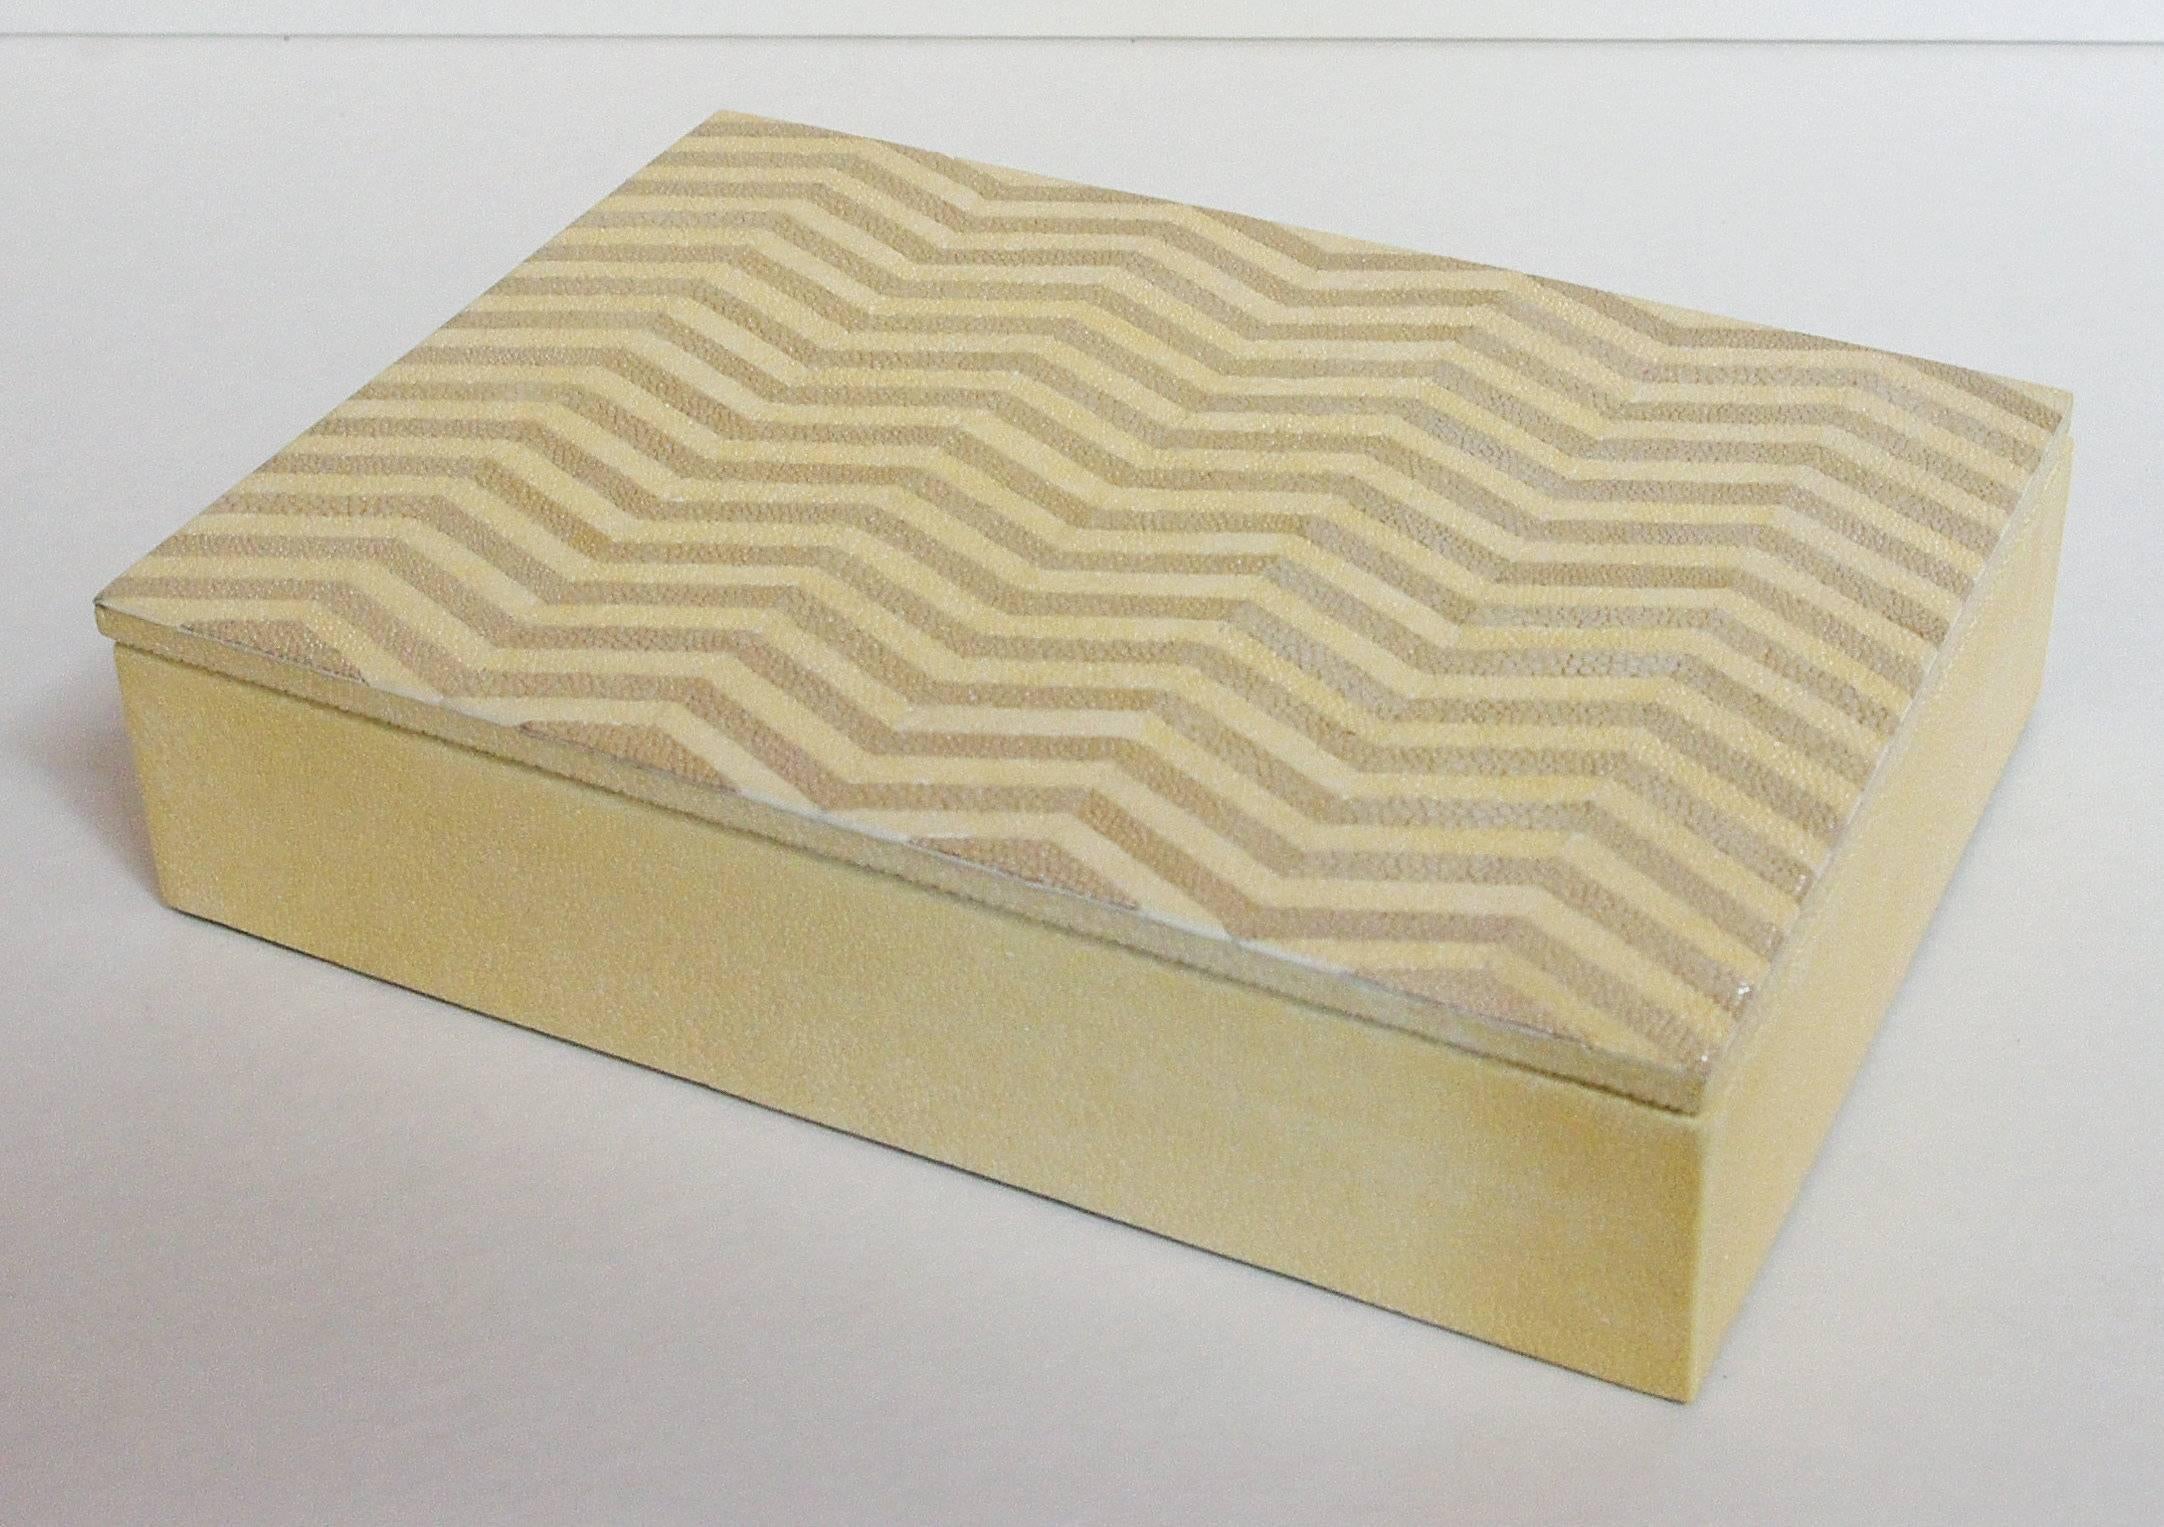 Ivory and brown Shagreen box with zigzag pattern and gray suede interior
Width: 10 inches / Depth: 7 inches / Height: 2.5 inches
1 in stock in Palm Springs ON FINAL CLEARANCE SALE for $595 !!! 
Order Reference #: FABIOLTD MR20
This piece makes for